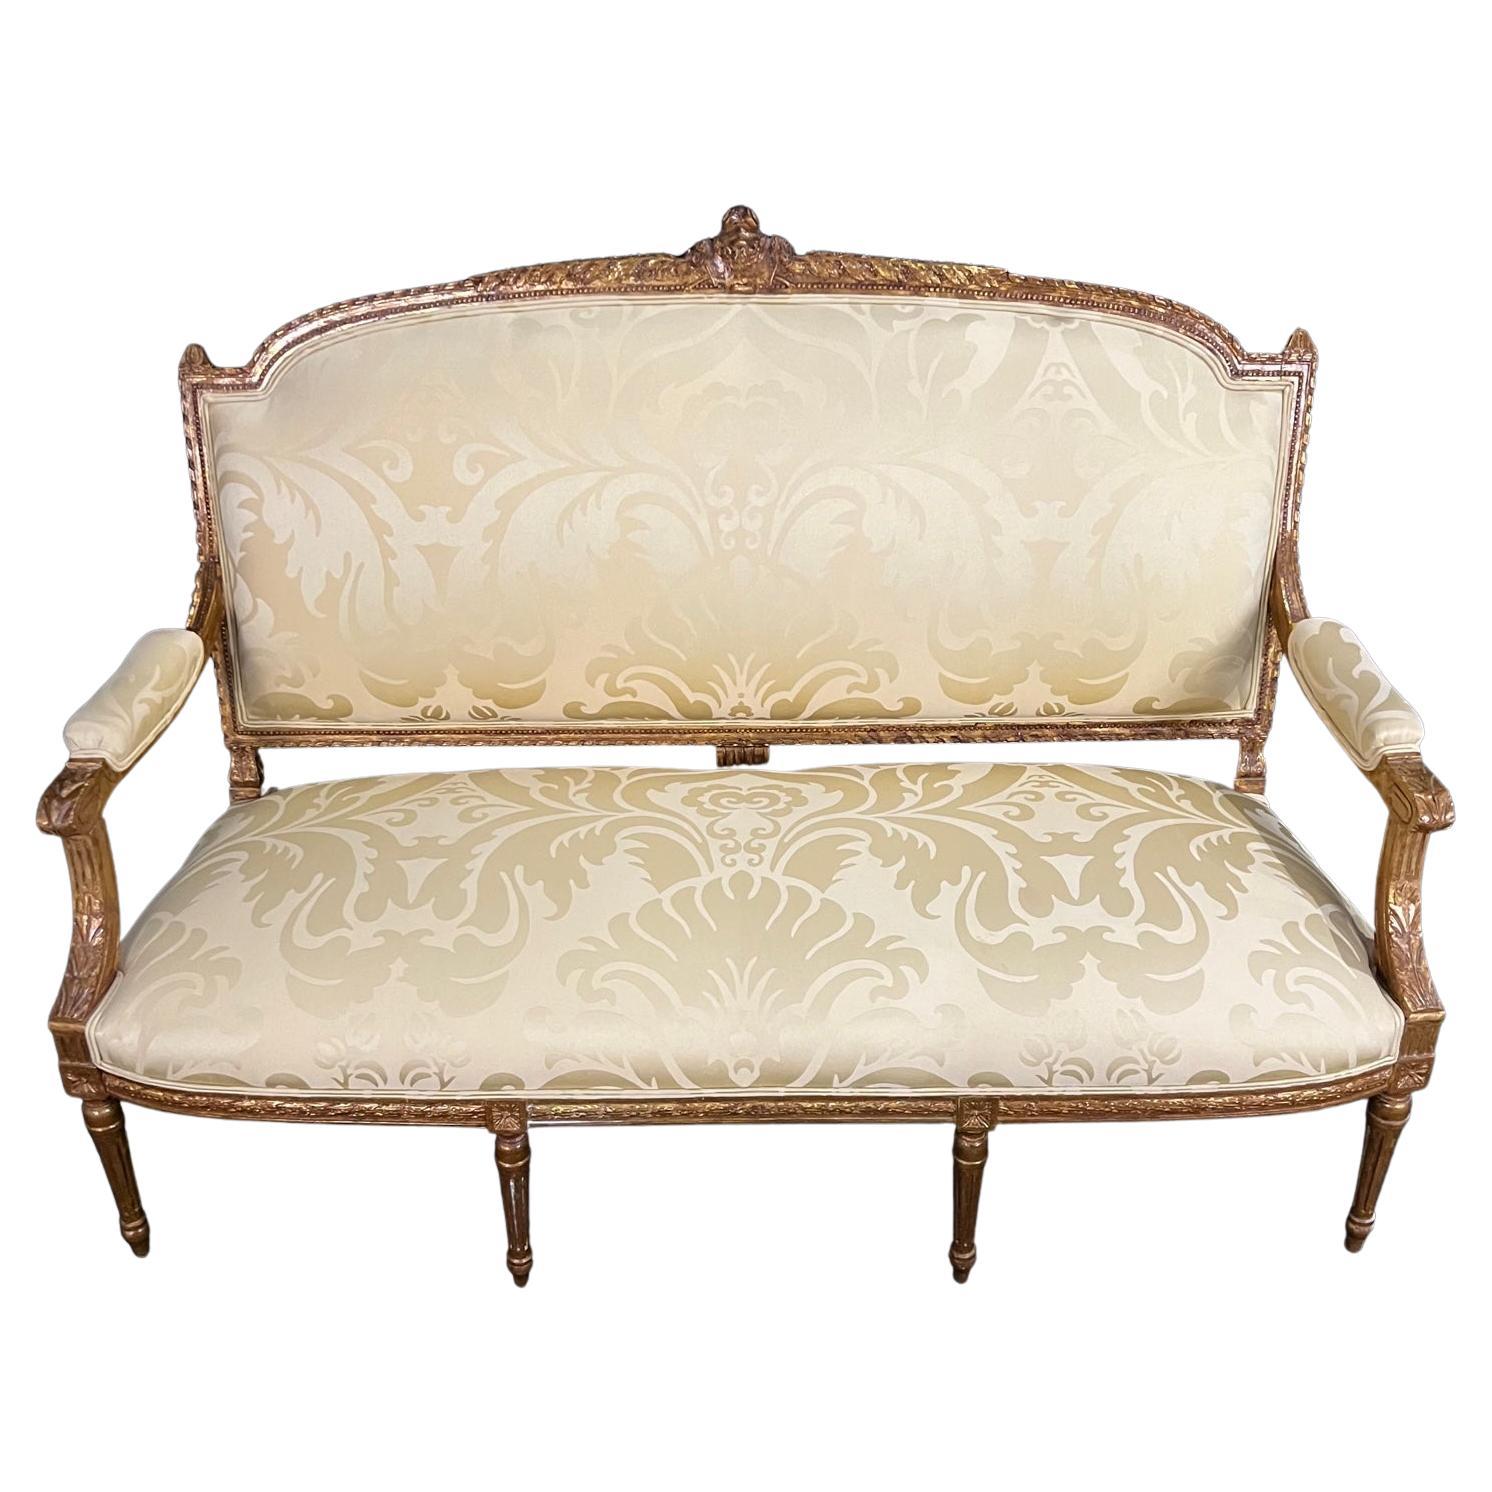 Fancy Louis XVI Giltwood Sofa Loveseat with New Silk Upholstery